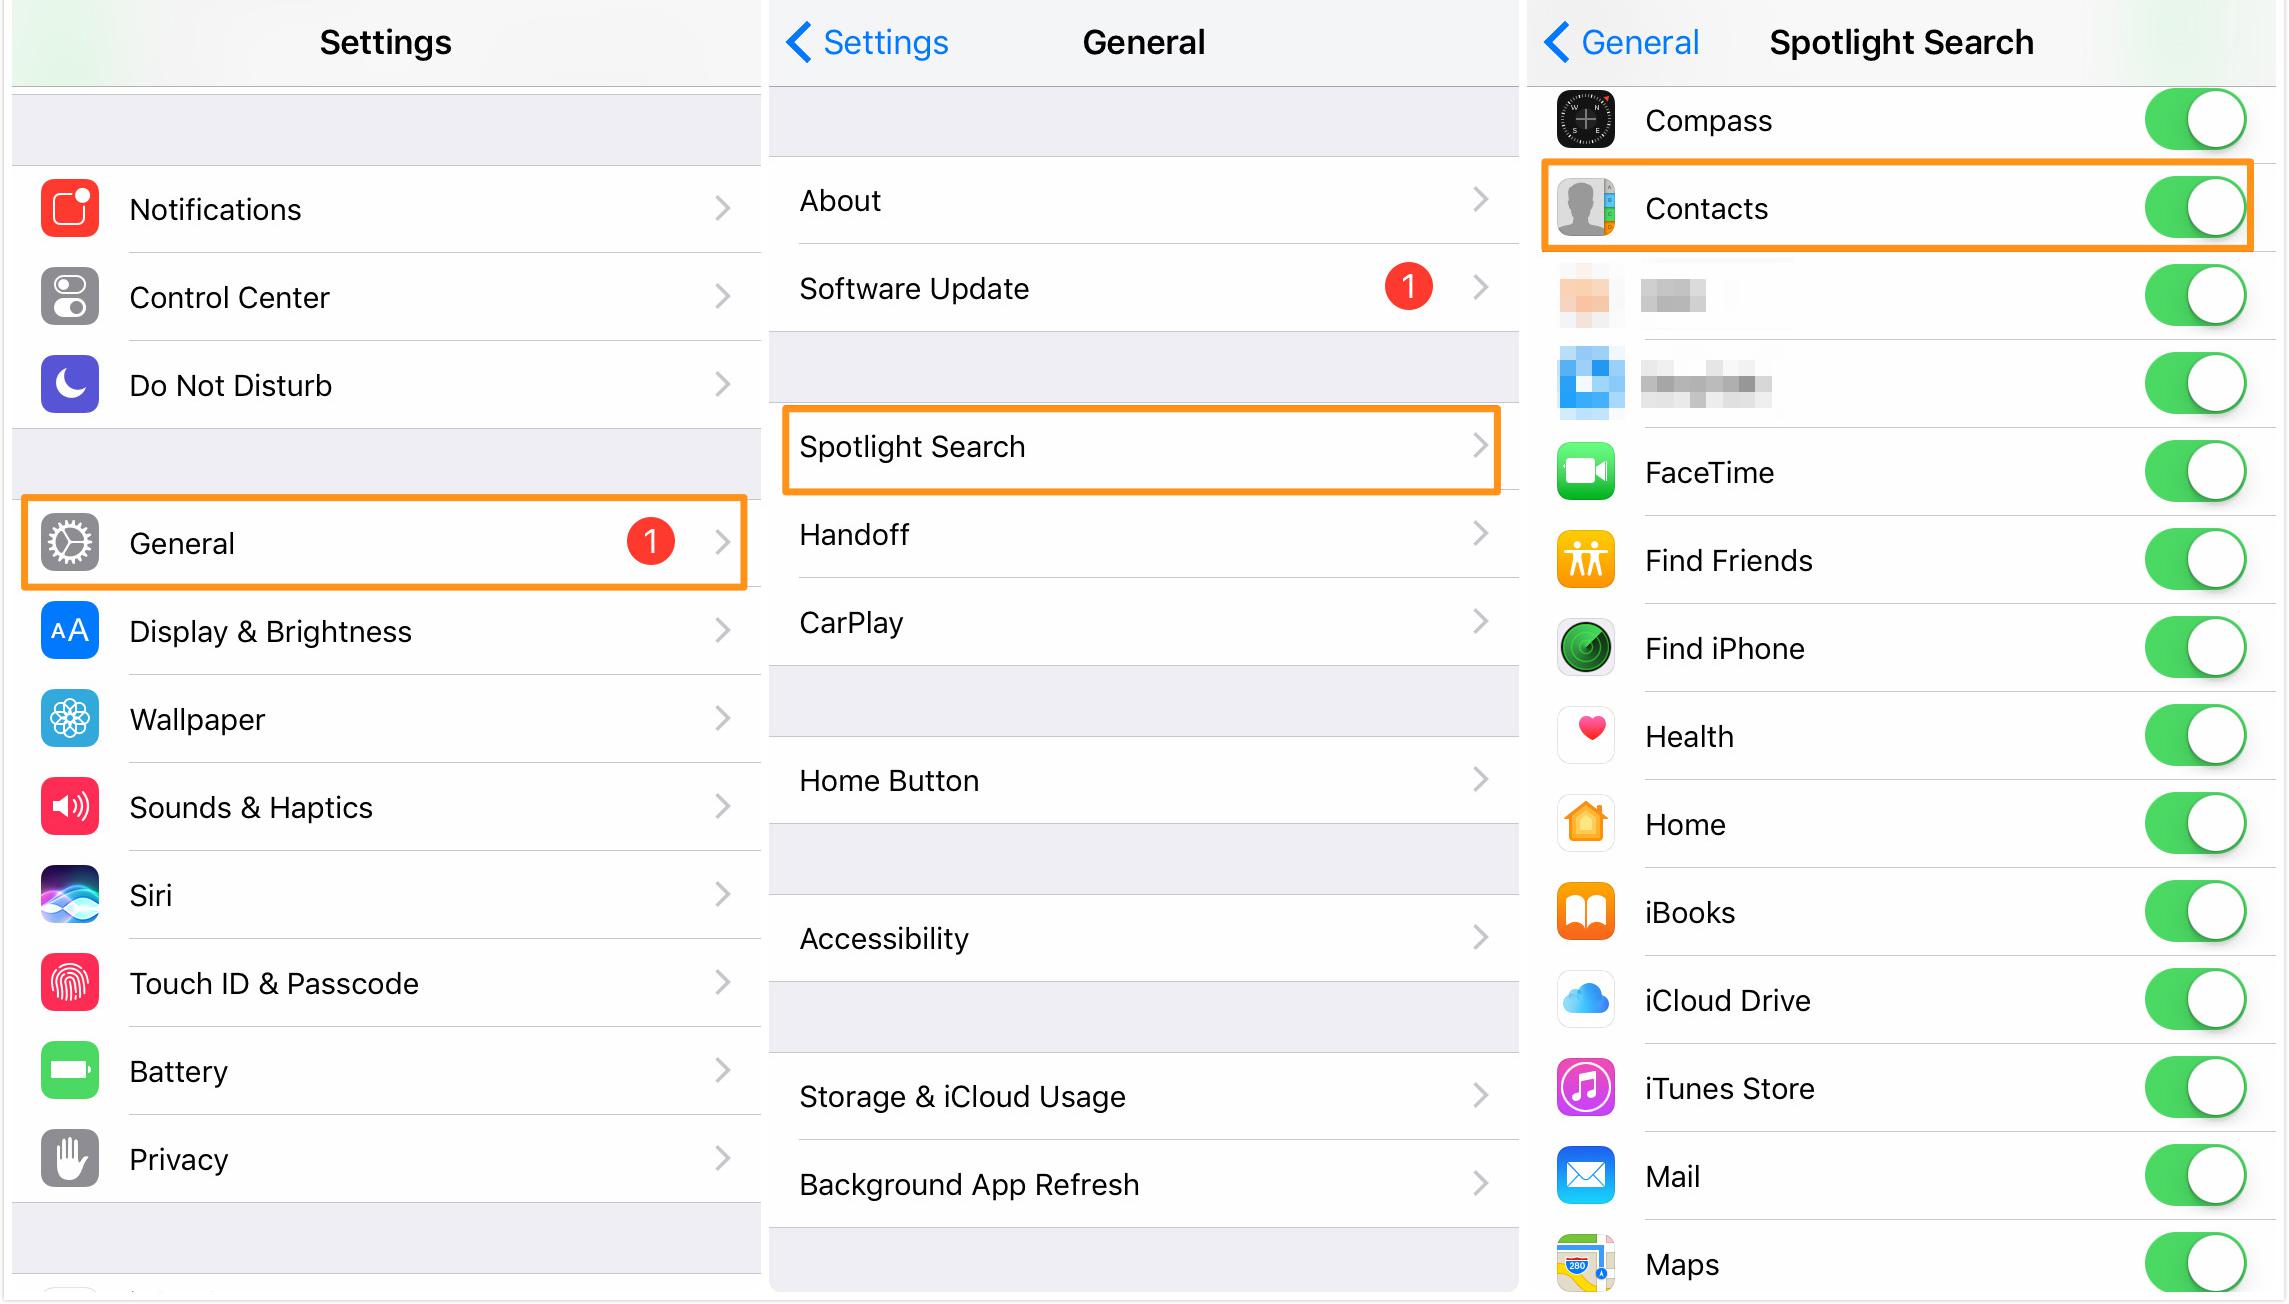 How to Fix iPhone Contact Search Not Working in iOS 10